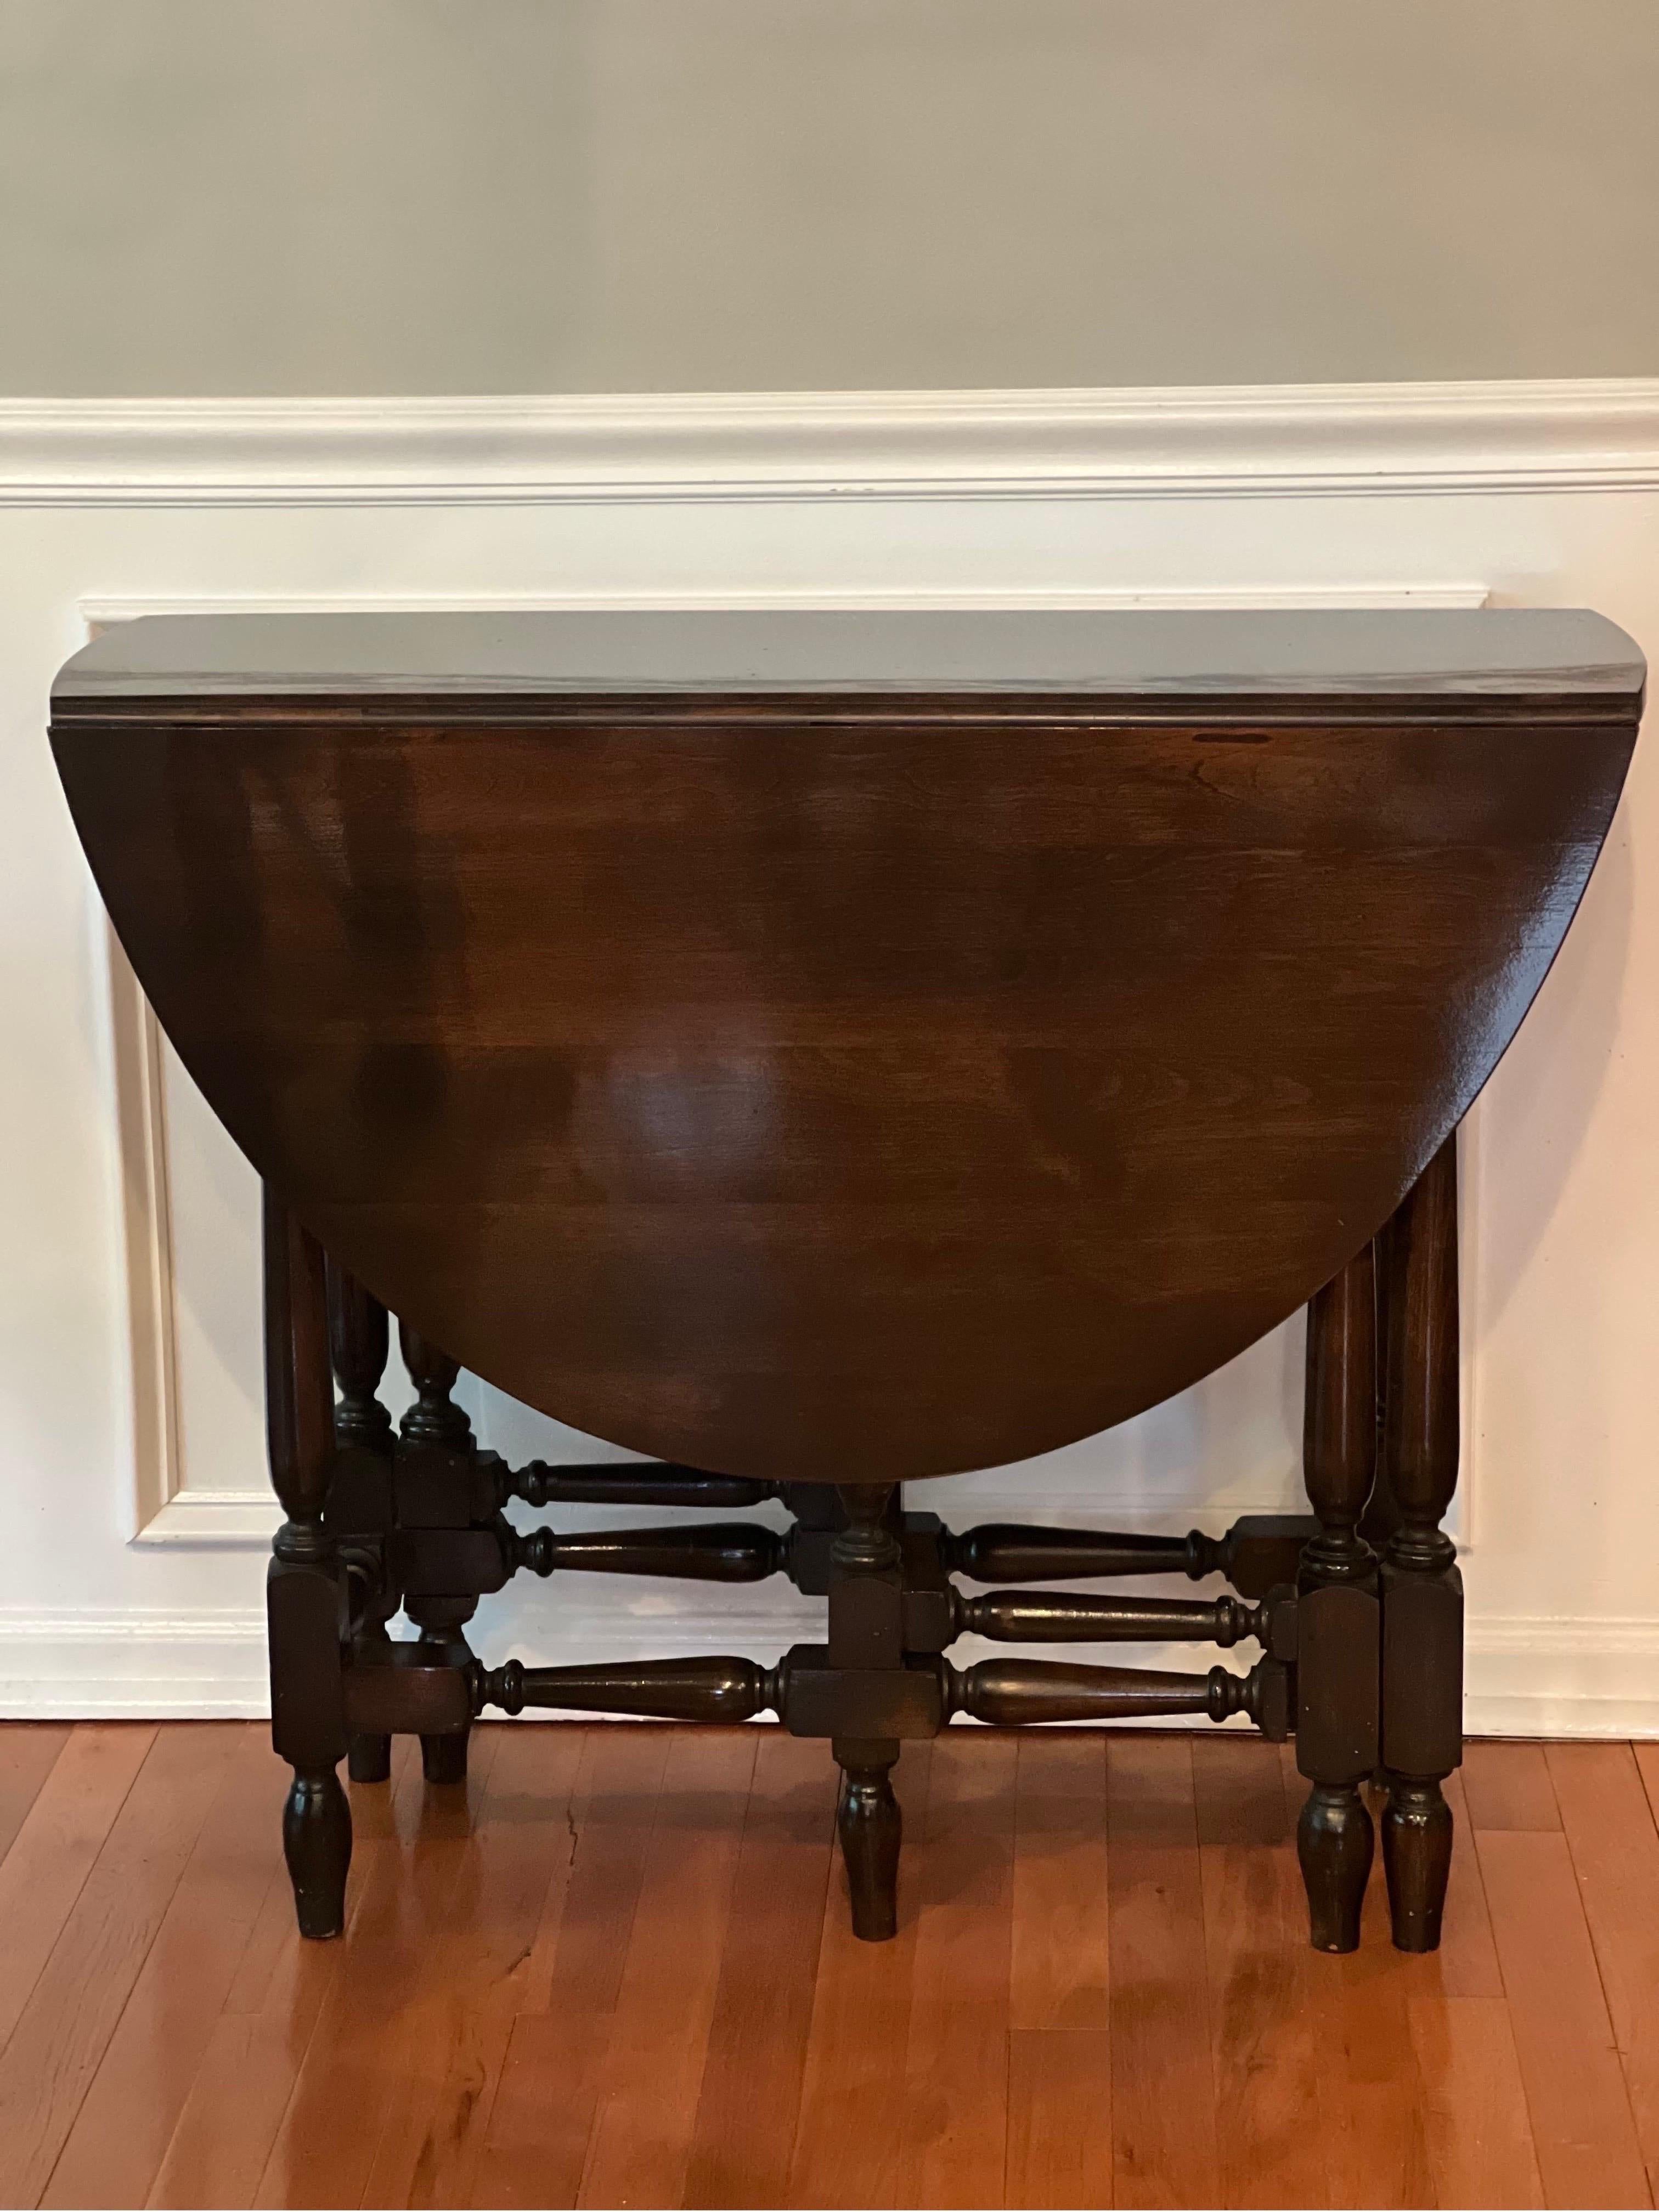 Beautiful early 1900's William and Mary style dark walnut gate leg, drop-leaf table. This oval top table features two drop leaves and baluster legs. When leaves are fully extended, table opens up to 47.5